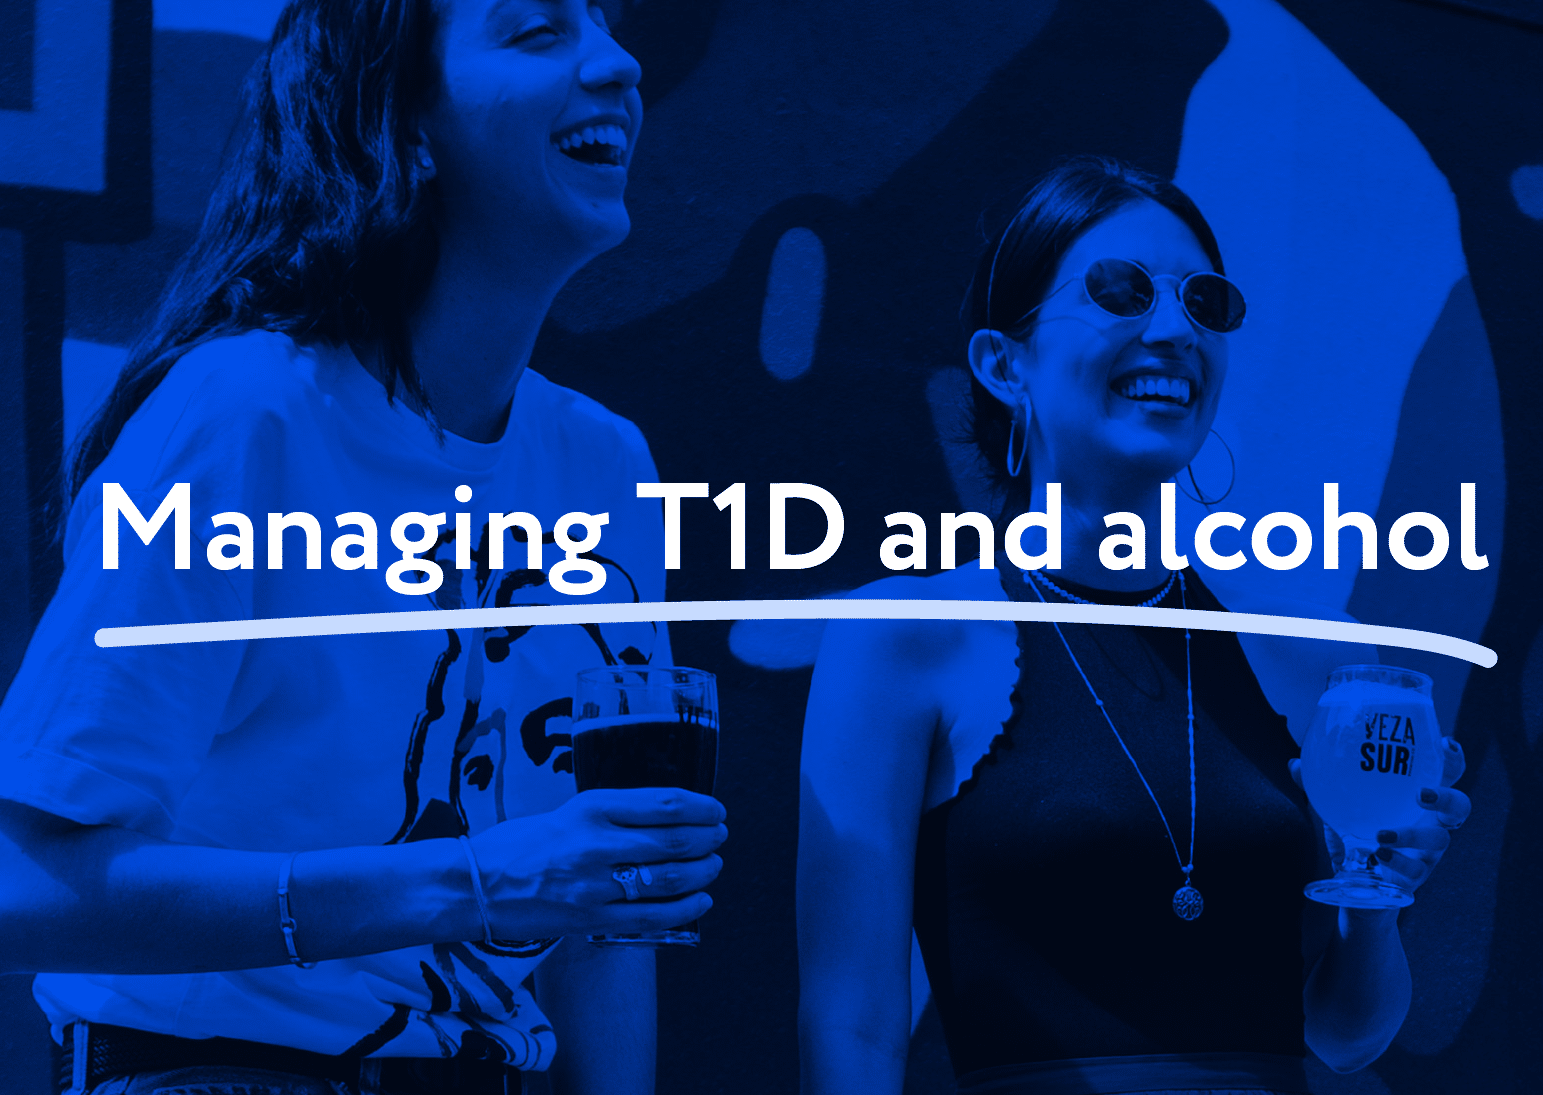 Type 1 diabetes and alcohol: A guide to managing T1D on a night out